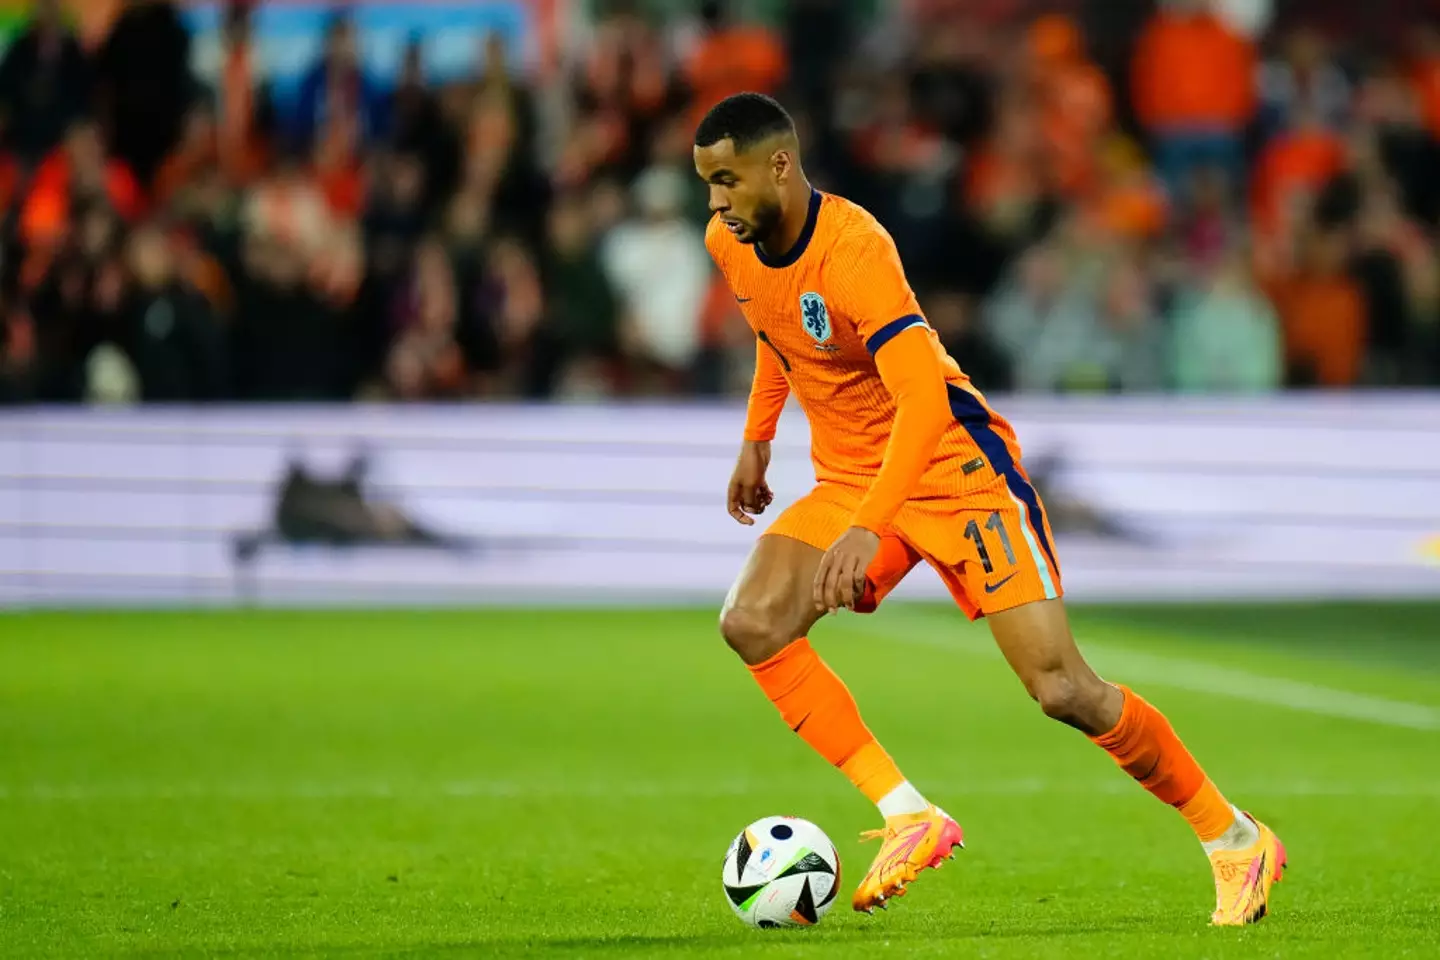 Cody Gakpo started for The Netherlands as they drew 0-0 with France at the Euros. (Image: Getty)